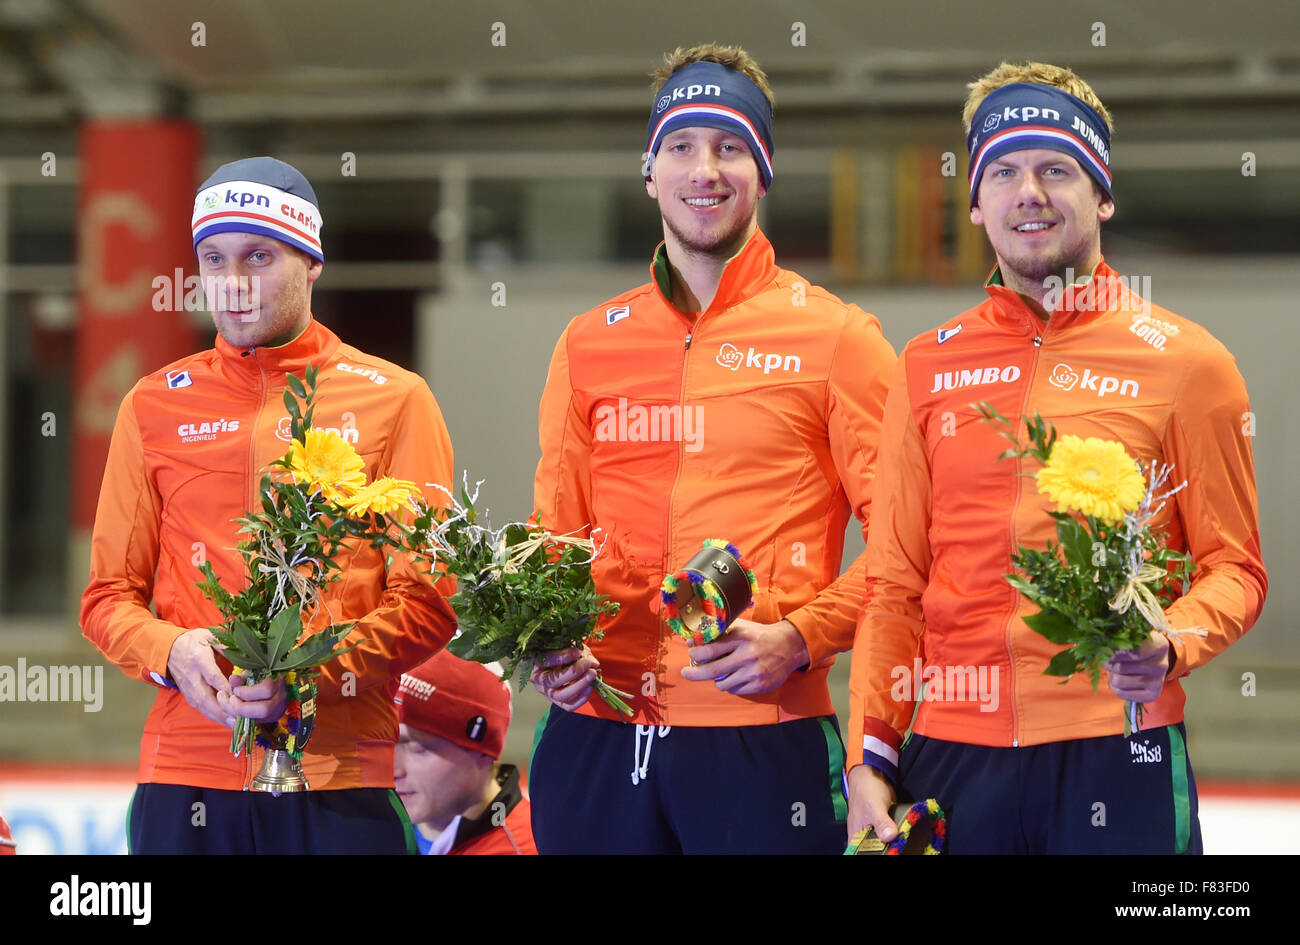 Inzell, Germany. 4th Dec, 2015. The Netherlands' Arjan Stroetinga, Jan Blokhuijsen and Douwe de Vries at the victory ceremony after coming 1st in the men's team competition of the speed skating world cup in the Max-Aicher-Arena in Inzell, Germany, 4 December 2015. PHOTO: TOBIAS HASE/DPA/Alamy Live News Stock Photo